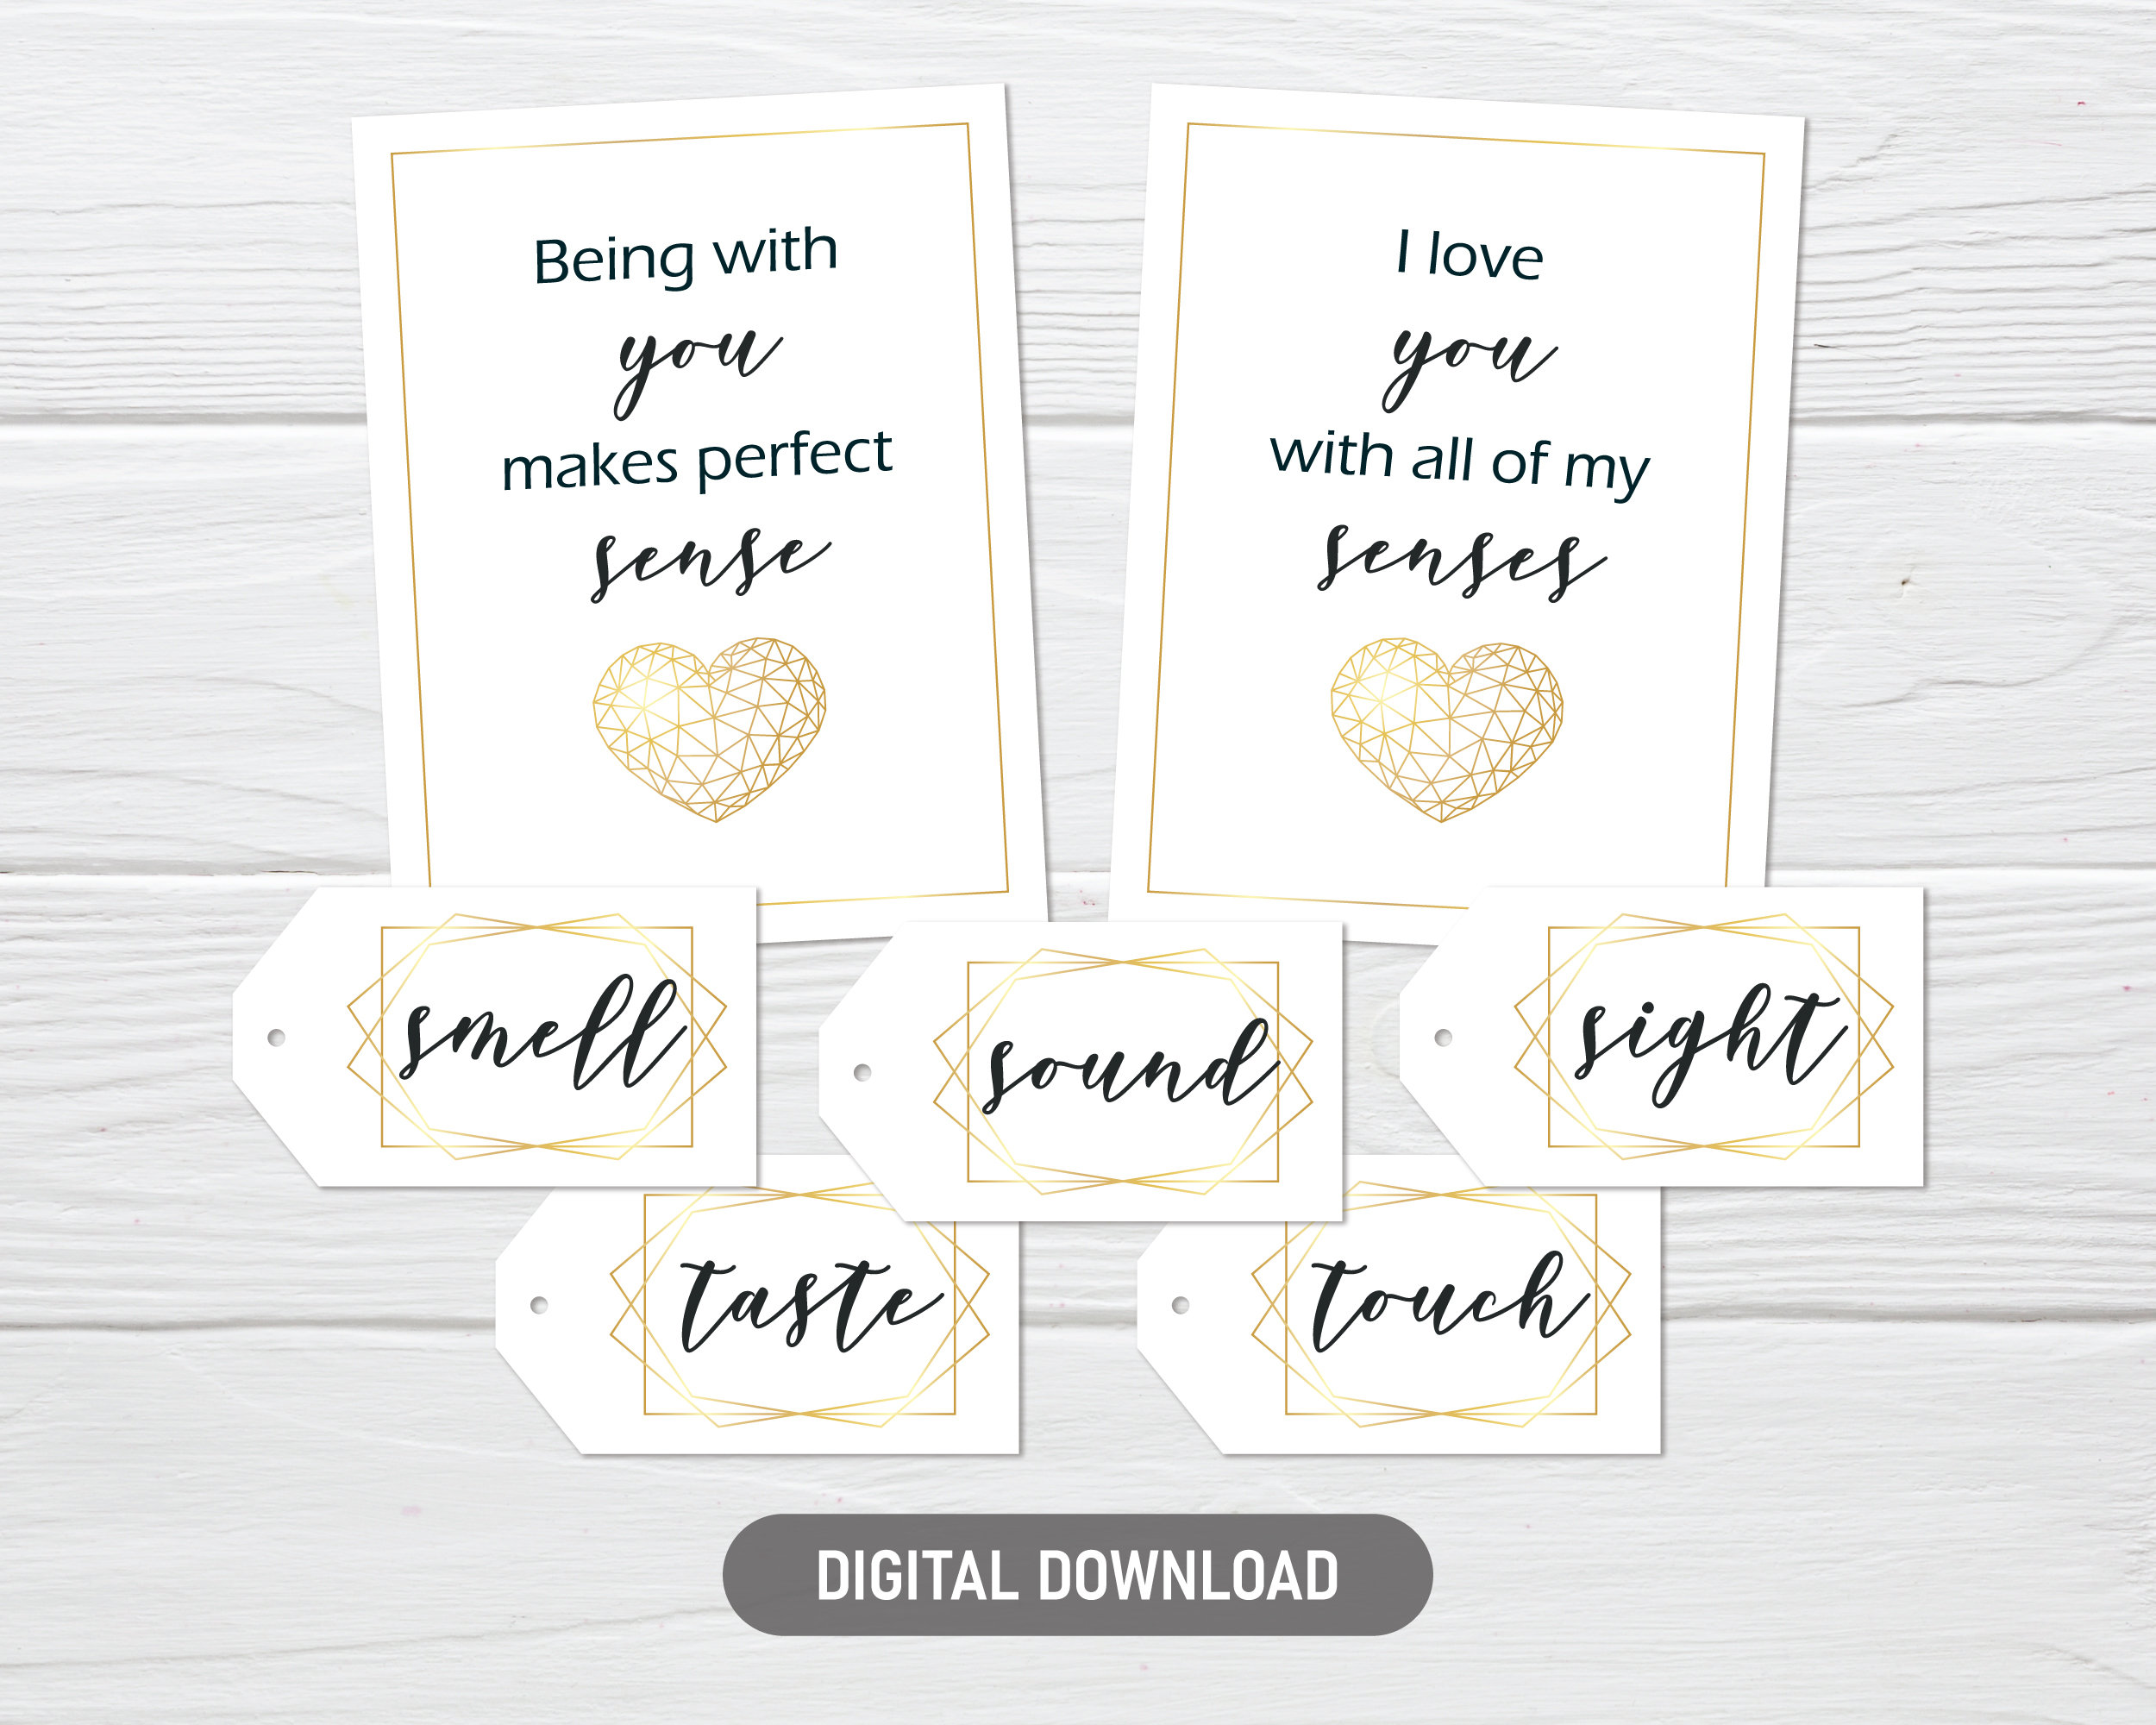 Five Senses Gift Tags & Card. Secret Person Exchange. Instant Download  Printable. 5 Christmas Present Friend, Neighbor, Office Work Party. 